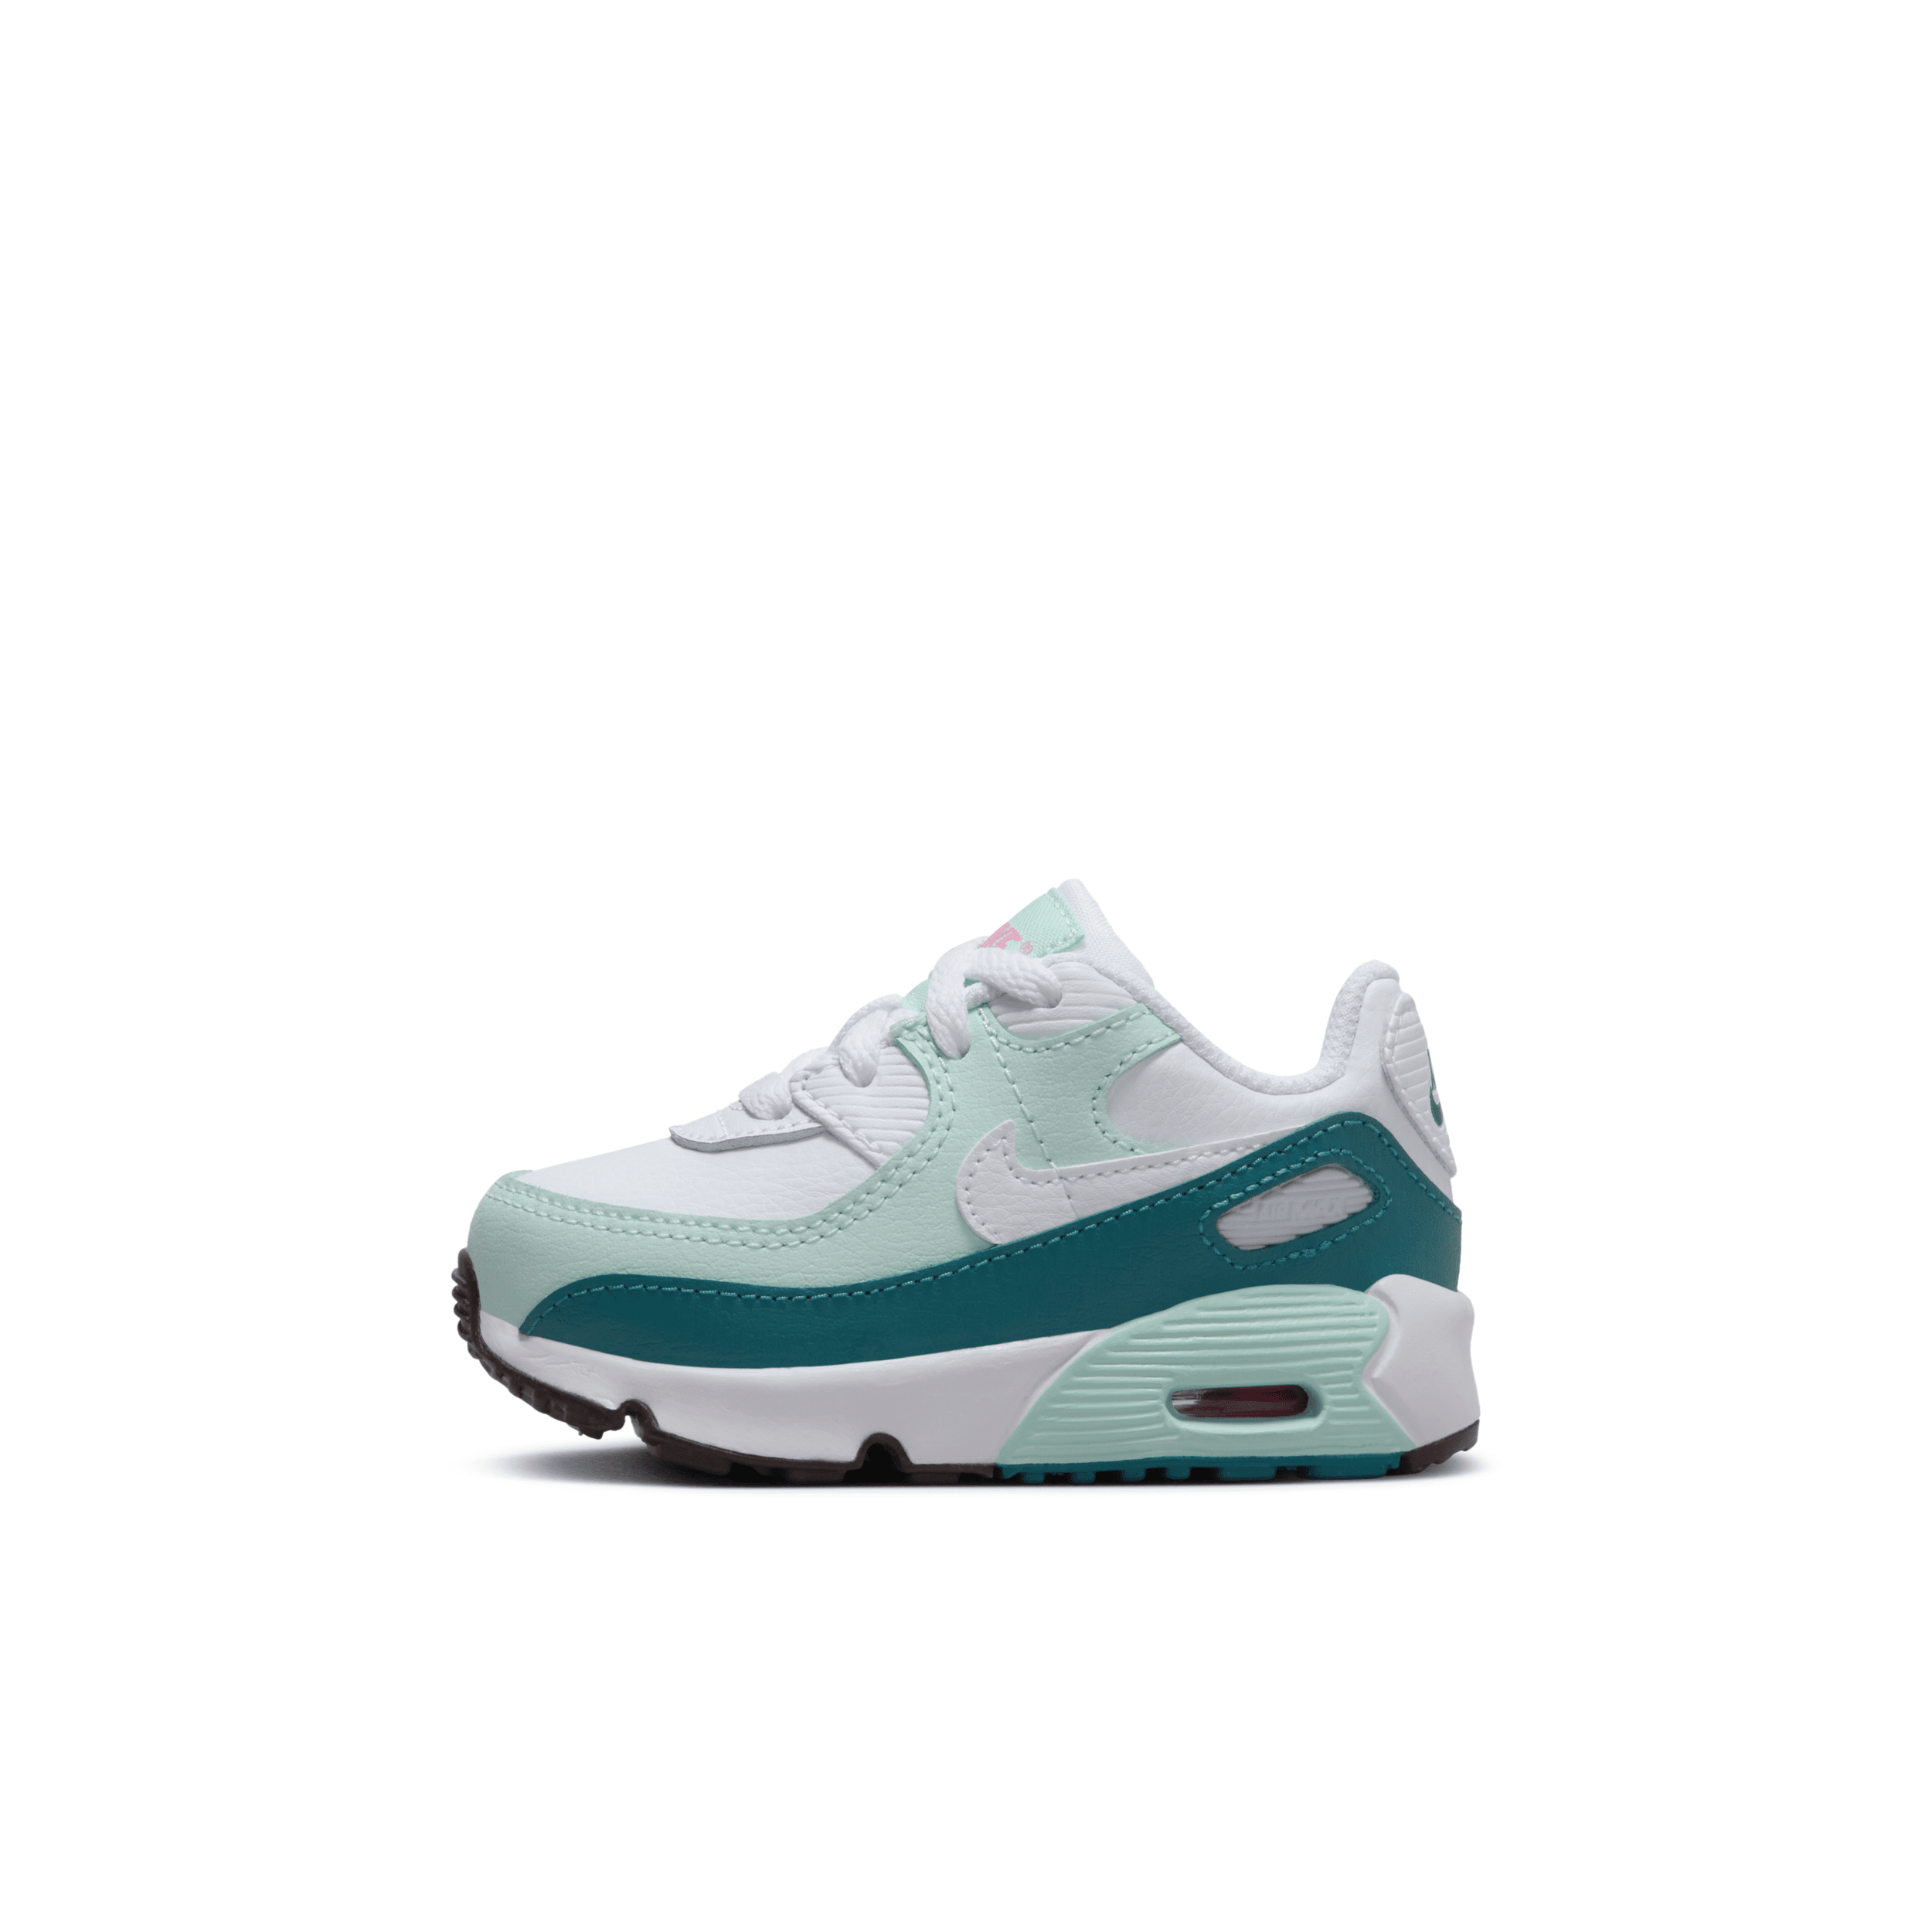 Nike Air Max 90 Ltr Baby/toddler Shoes In White/jade Ice/geode Teal/white